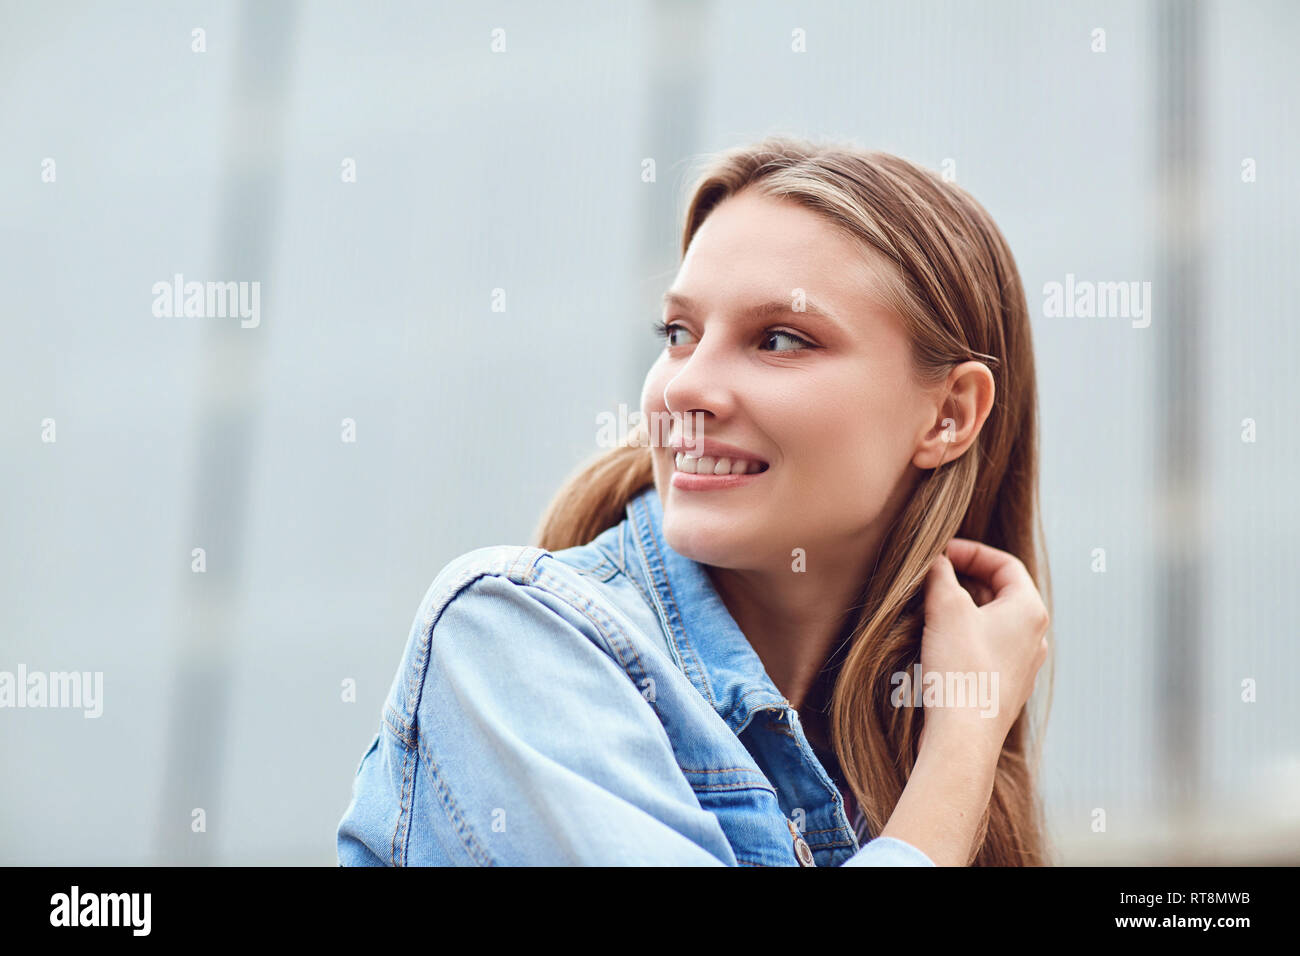 A blond happy girl smiles in an urban style.  Stock Photo